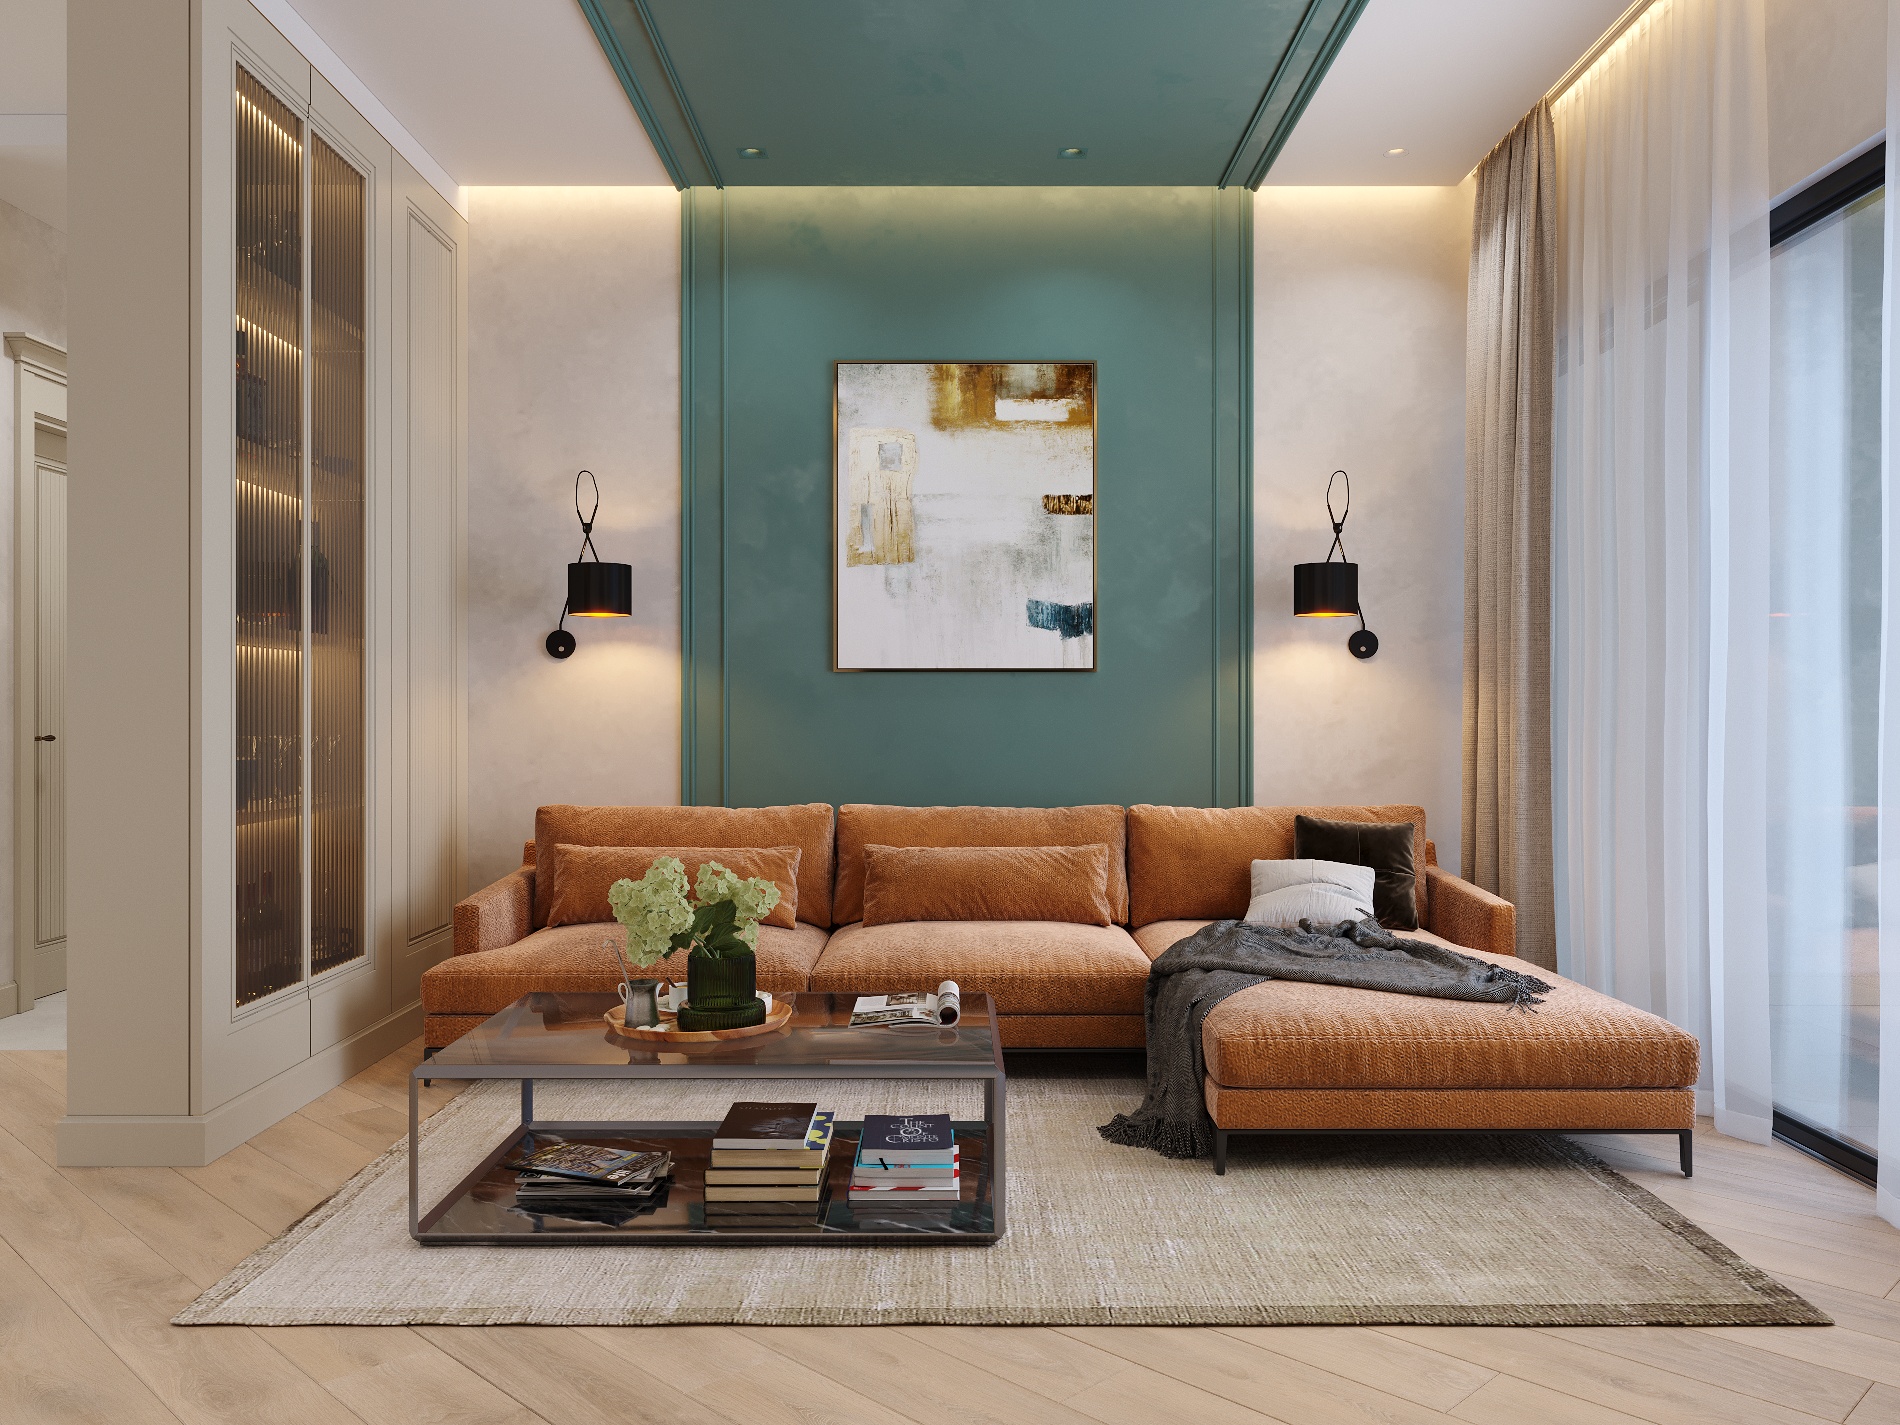 Chic living room in Limassol with a plush terracotta sofa set, elegant wall-mounted light fixtures, an abstract painting on a teal accent wall, and sheer curtains draping large windows.